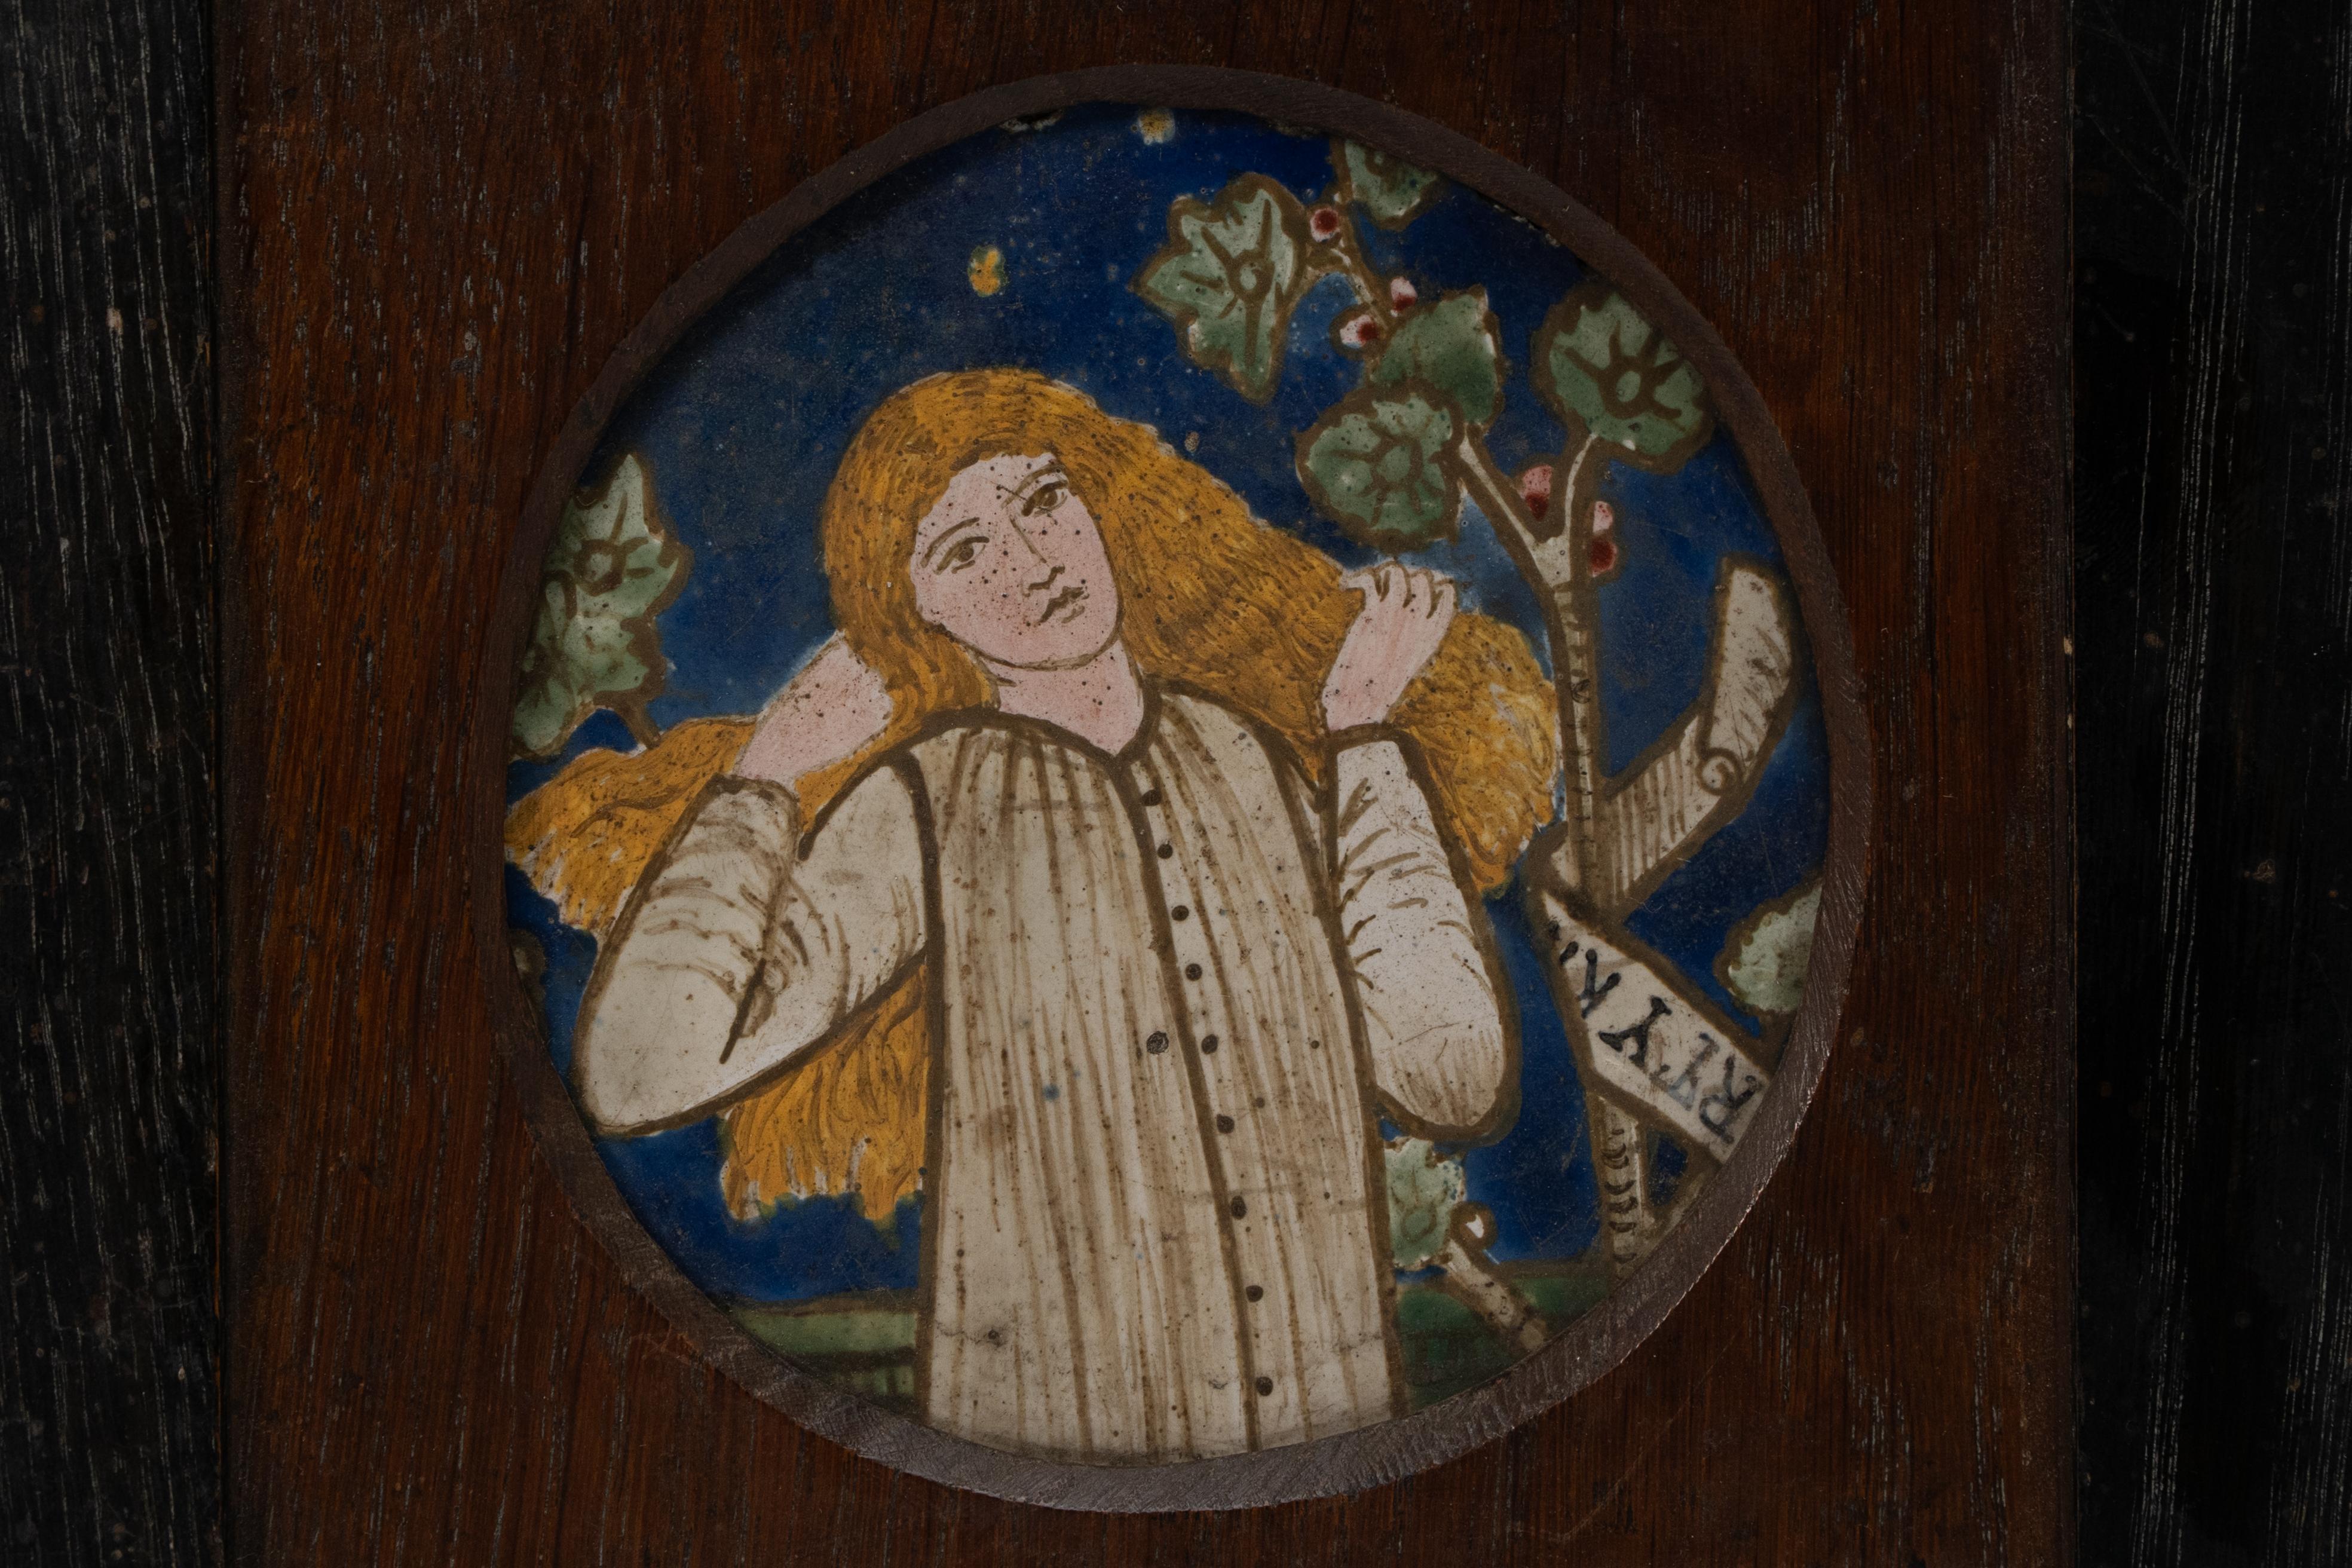 Edward Burne Jones for Morris & Co, designed in 1861-1862. A rare hand-painted tile depicting Chaucer's Legend of Good Wimmen. The Fiberite packing we found inside the frame probably dates back to the mid-1920s or early 1930s when it was likely to